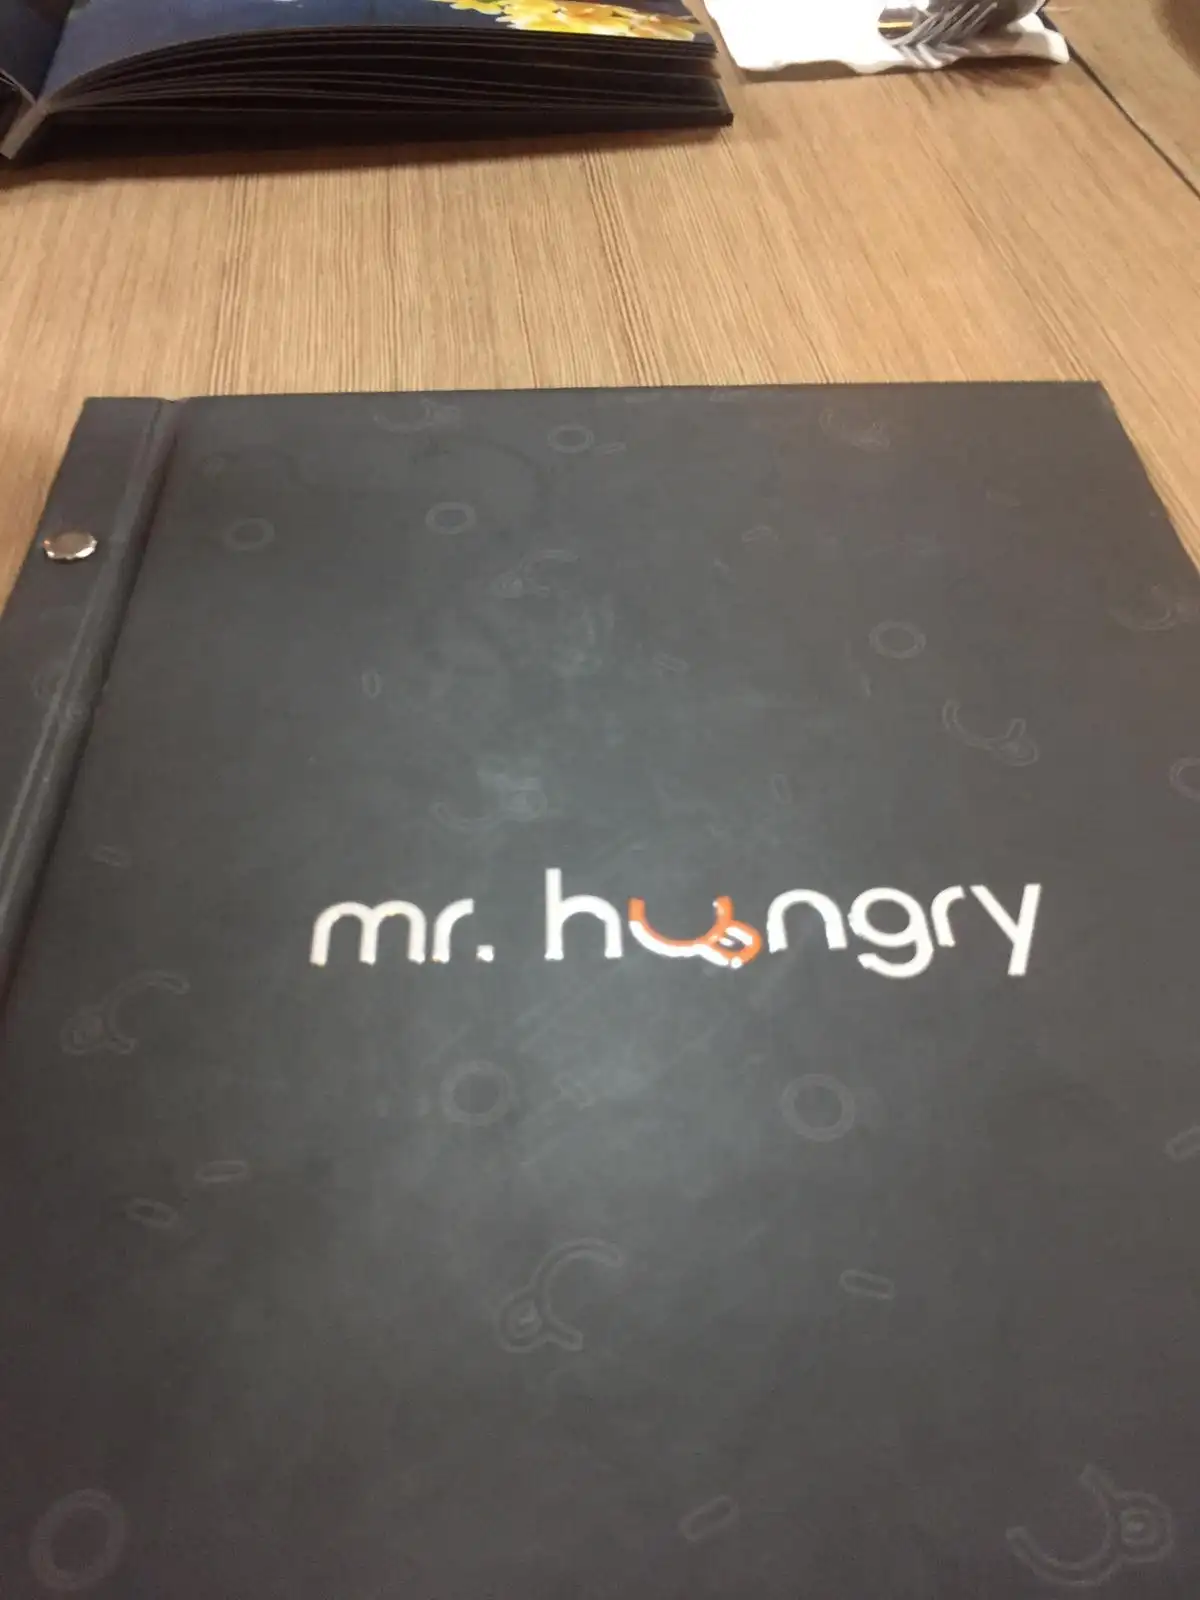 Mr. Hungry